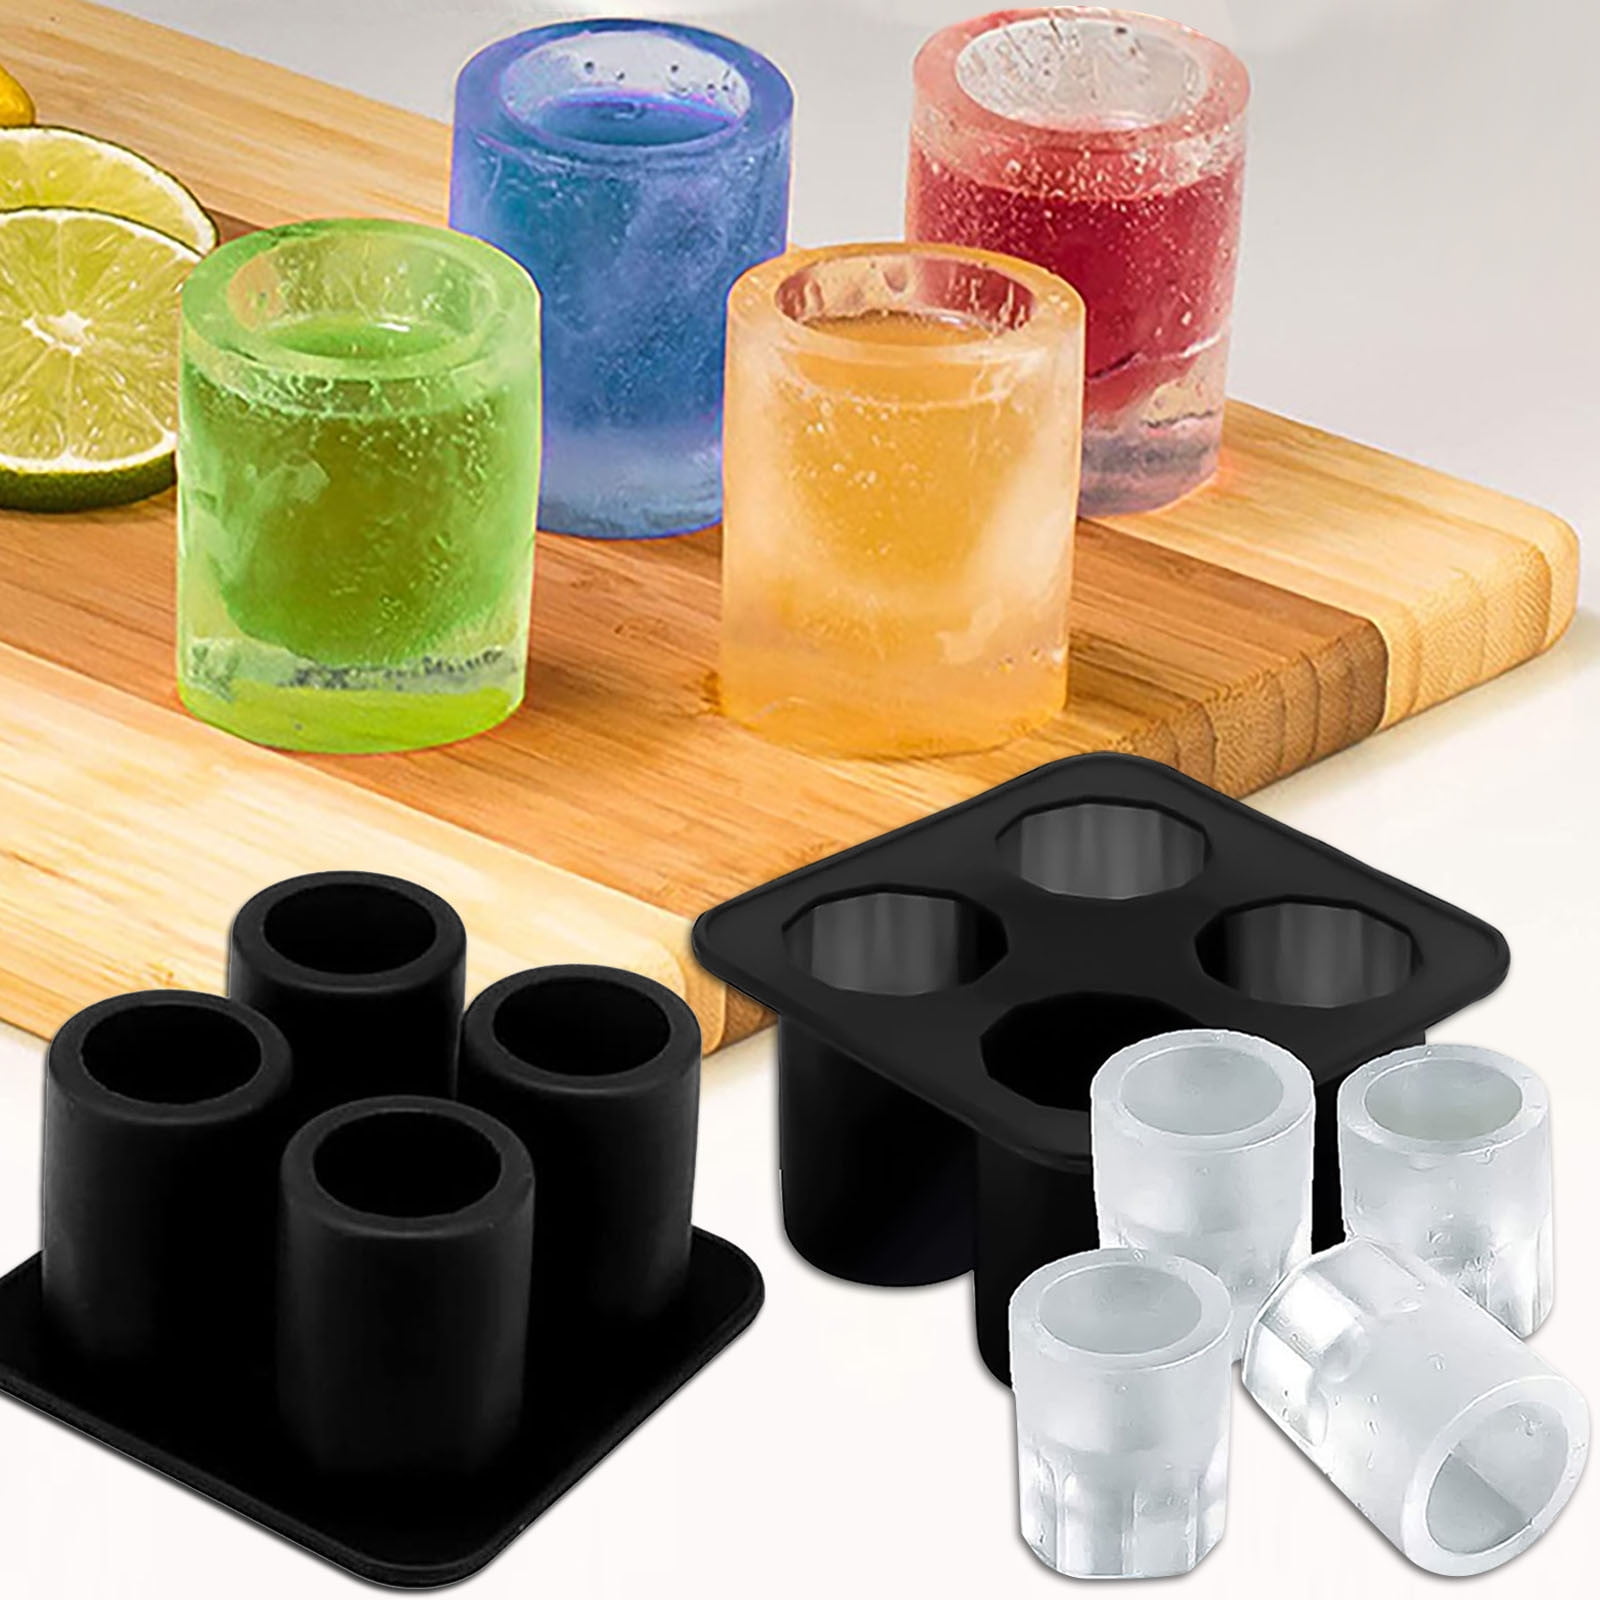 Creative Rectangle Shot Glasses Silicone ice tool Mold Maker Jelly J1R0 